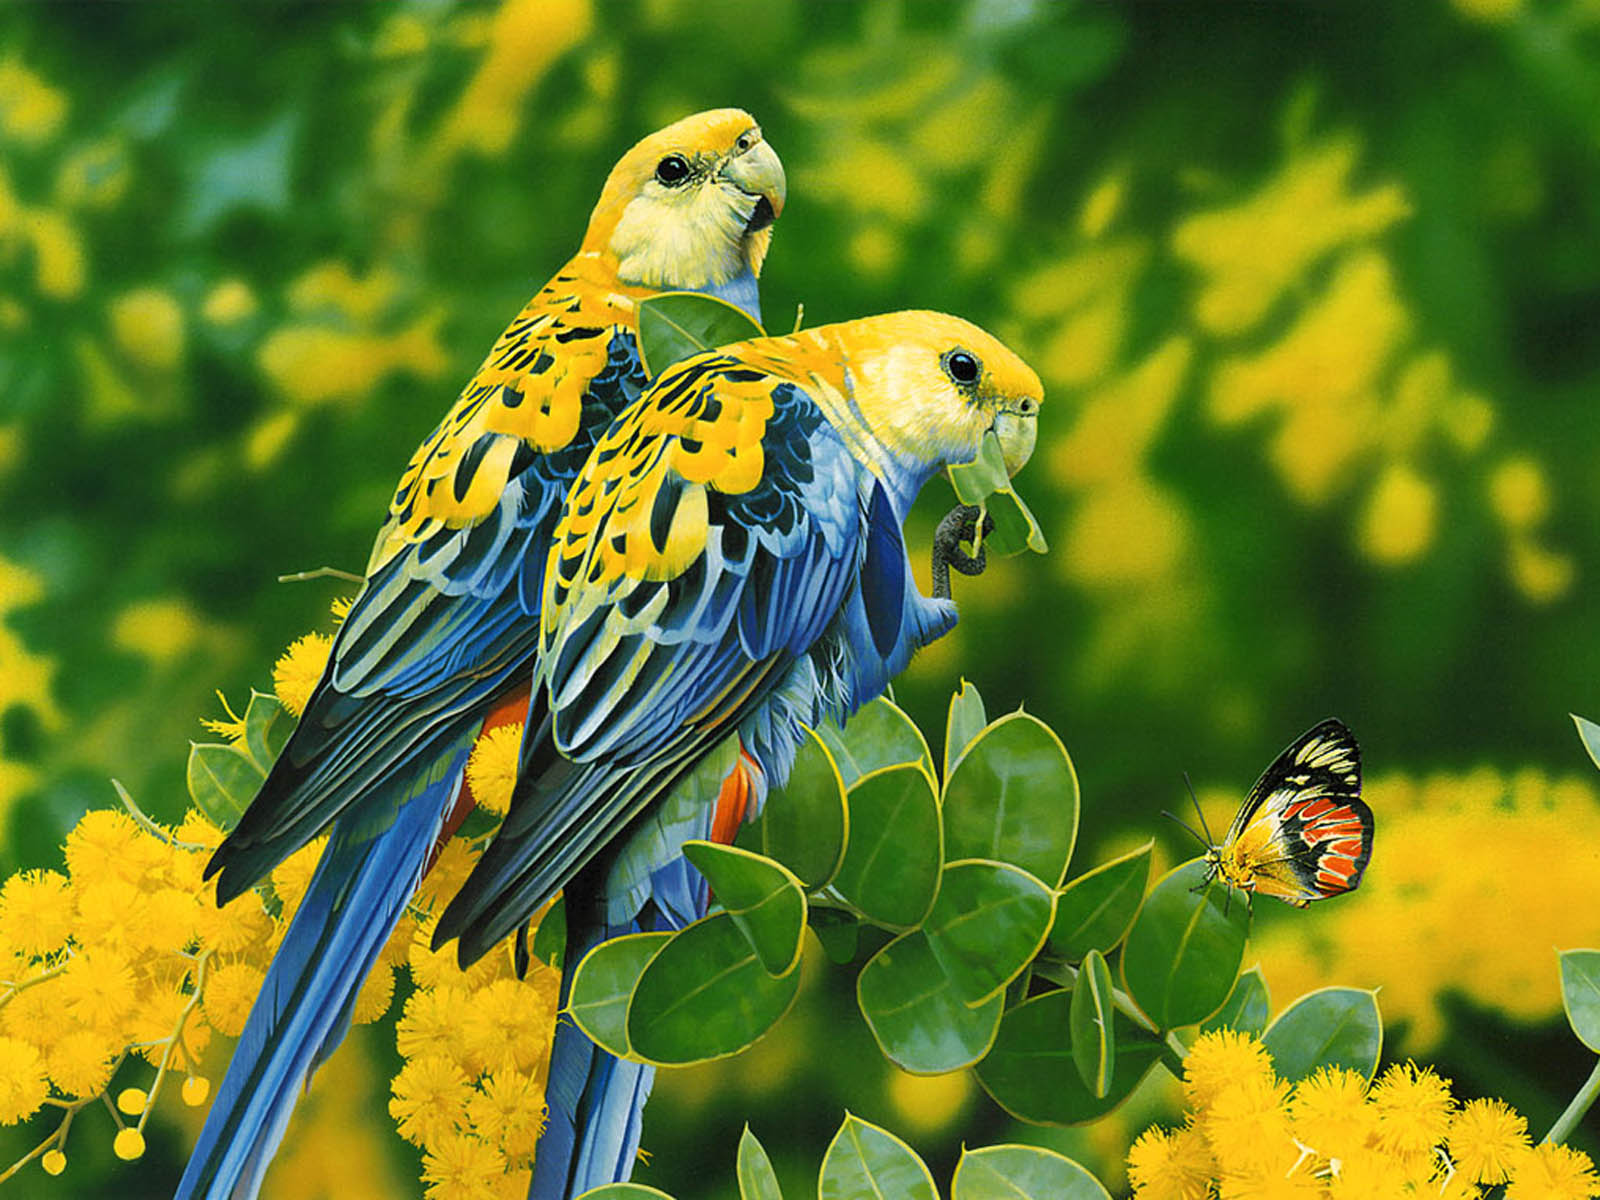 Tag Love Birds Desktop Wallpapers Backgrounds PhotosImages and 1600x1200